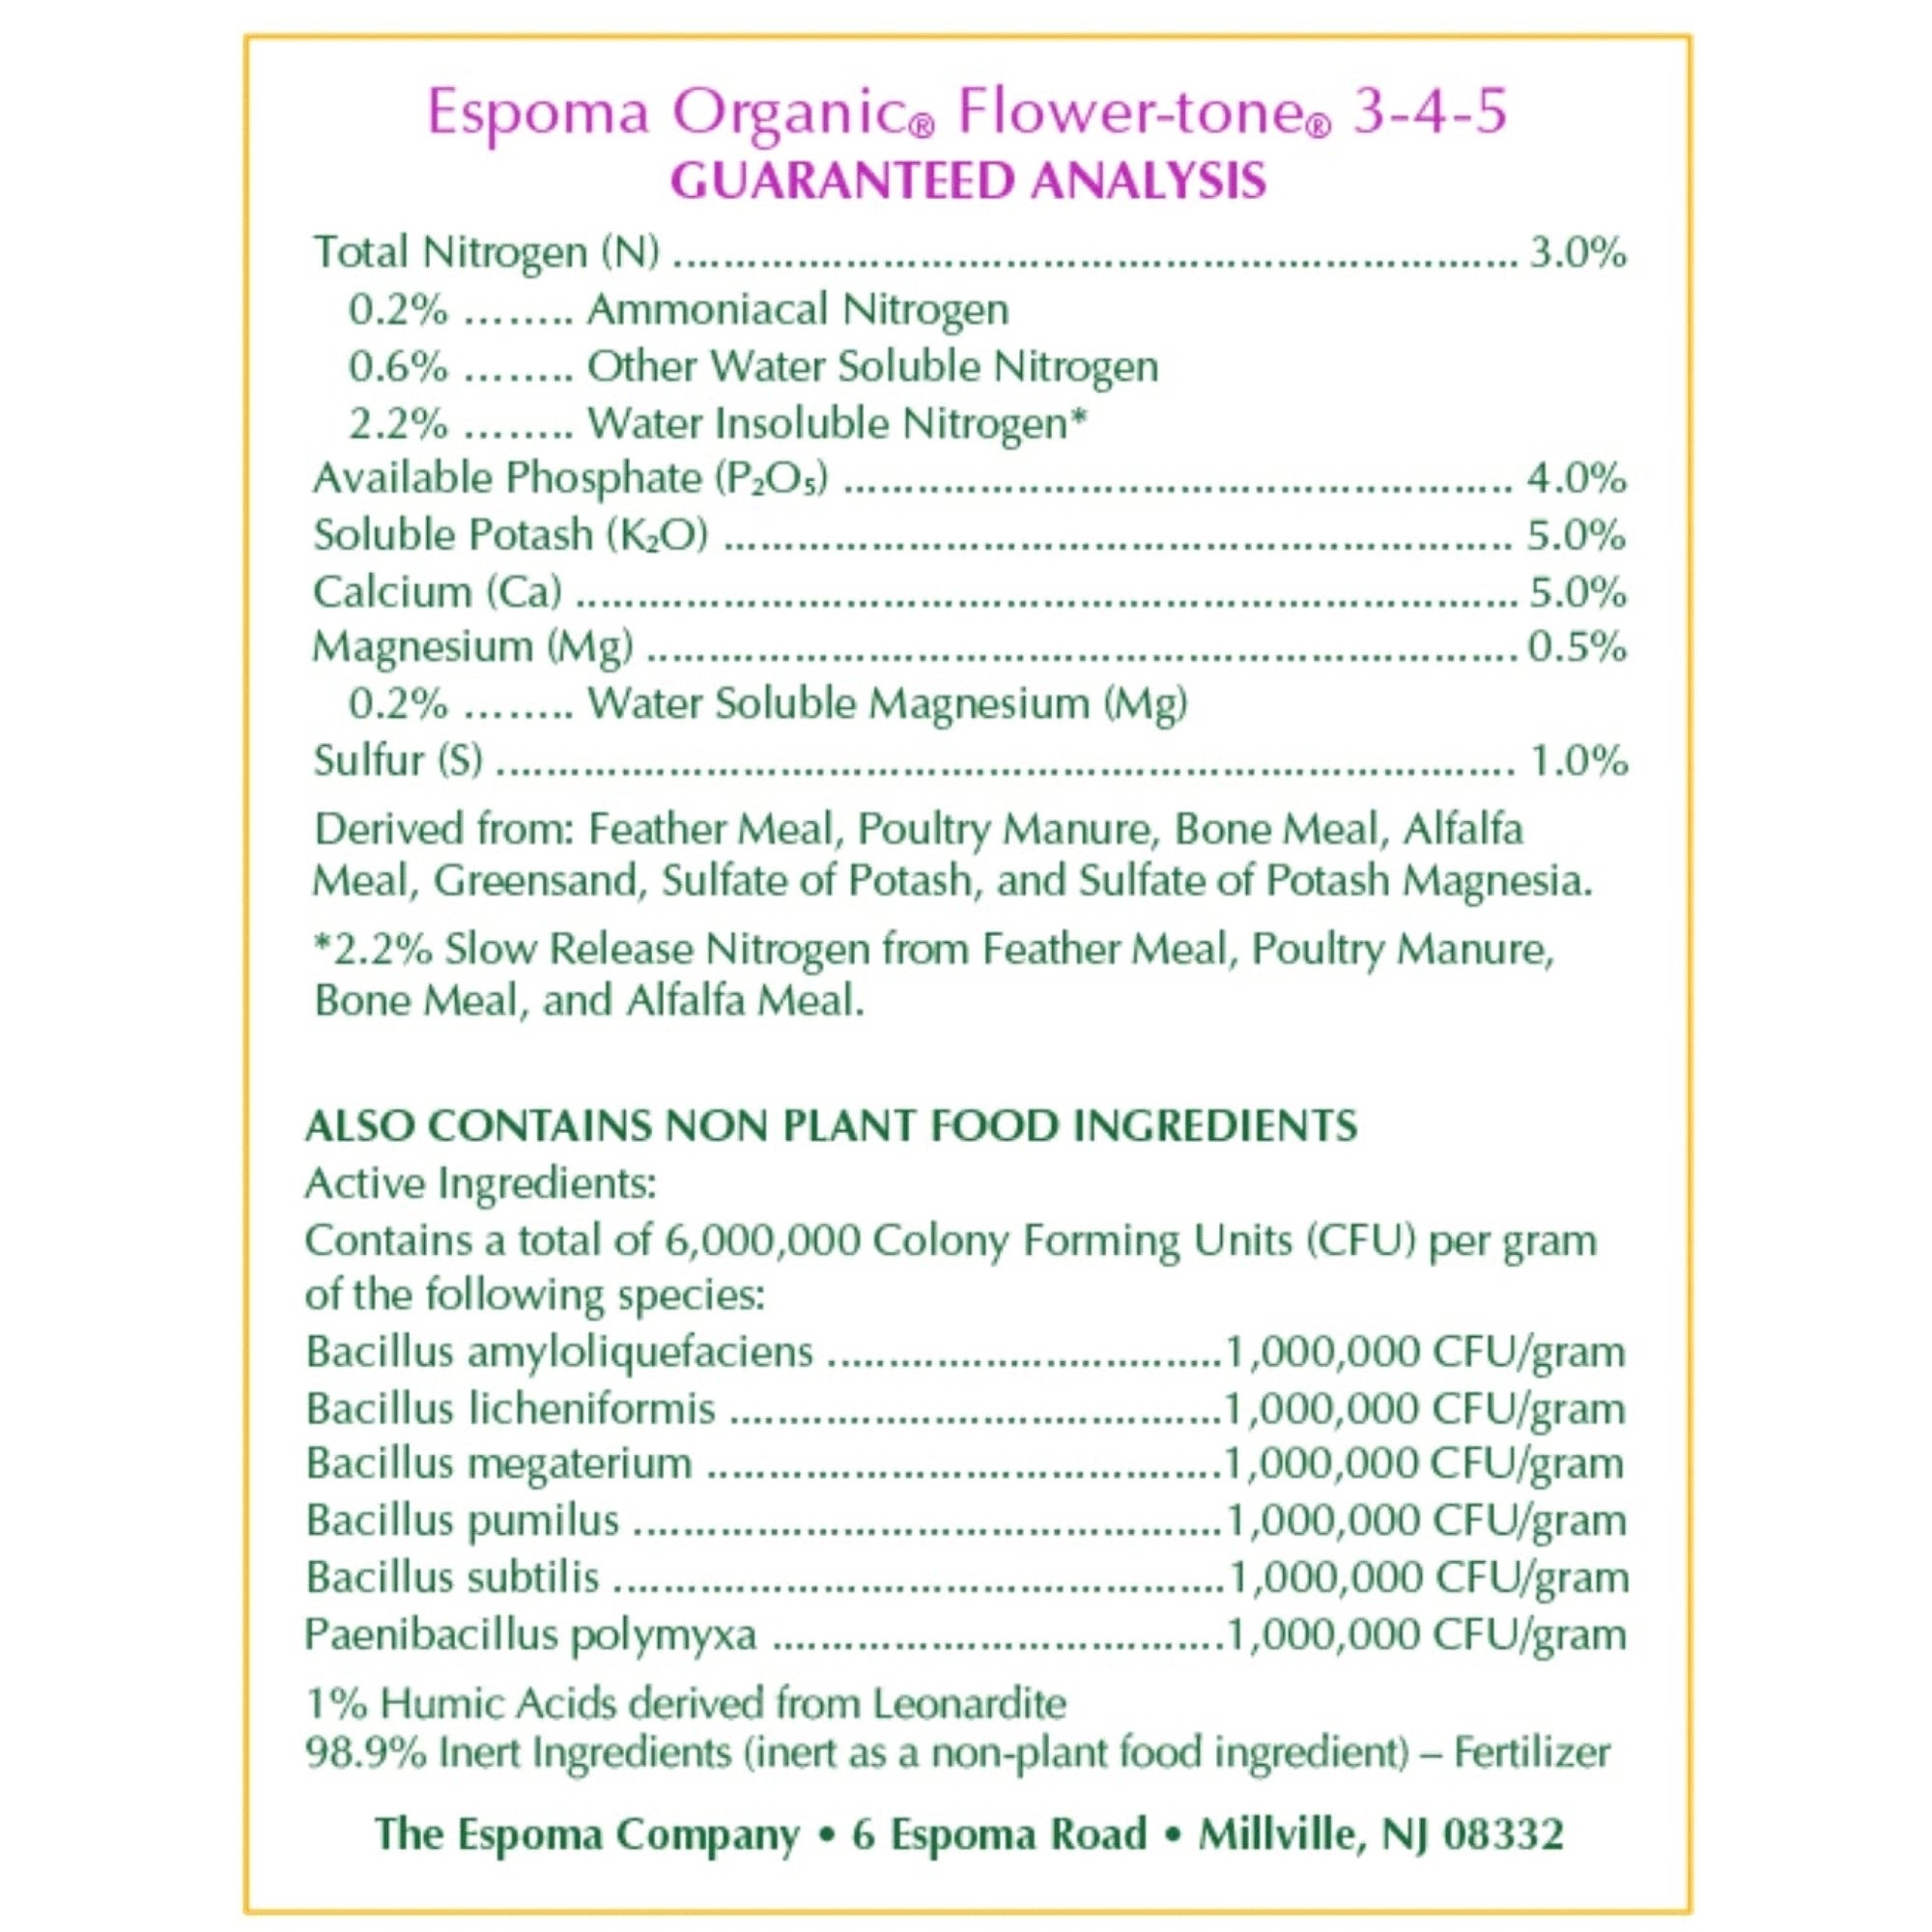 Espoma Organic Flower-tone 3-4-5 Blossom Booster for Organic Gardening for Flowers, Annuals, Perennials & Hanging Baskets